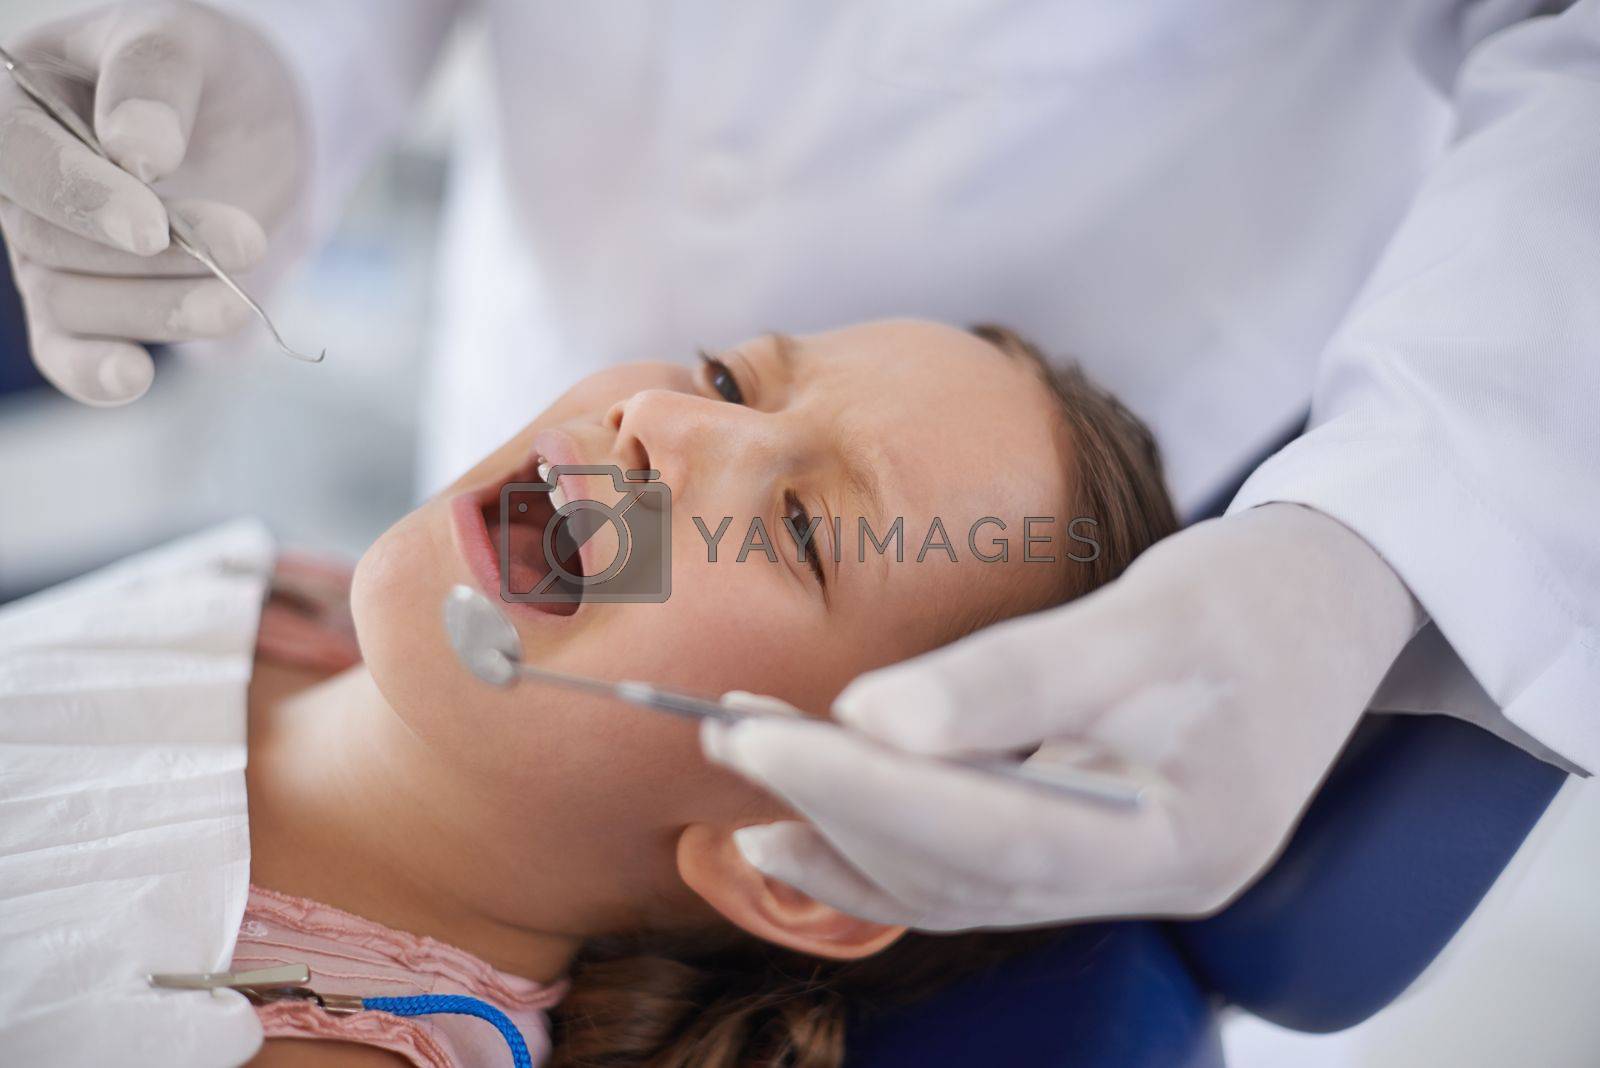 Royalty free image of At the dentist for her regular check-up. A young girl at the dentist for a check-up. by YuriArcurs